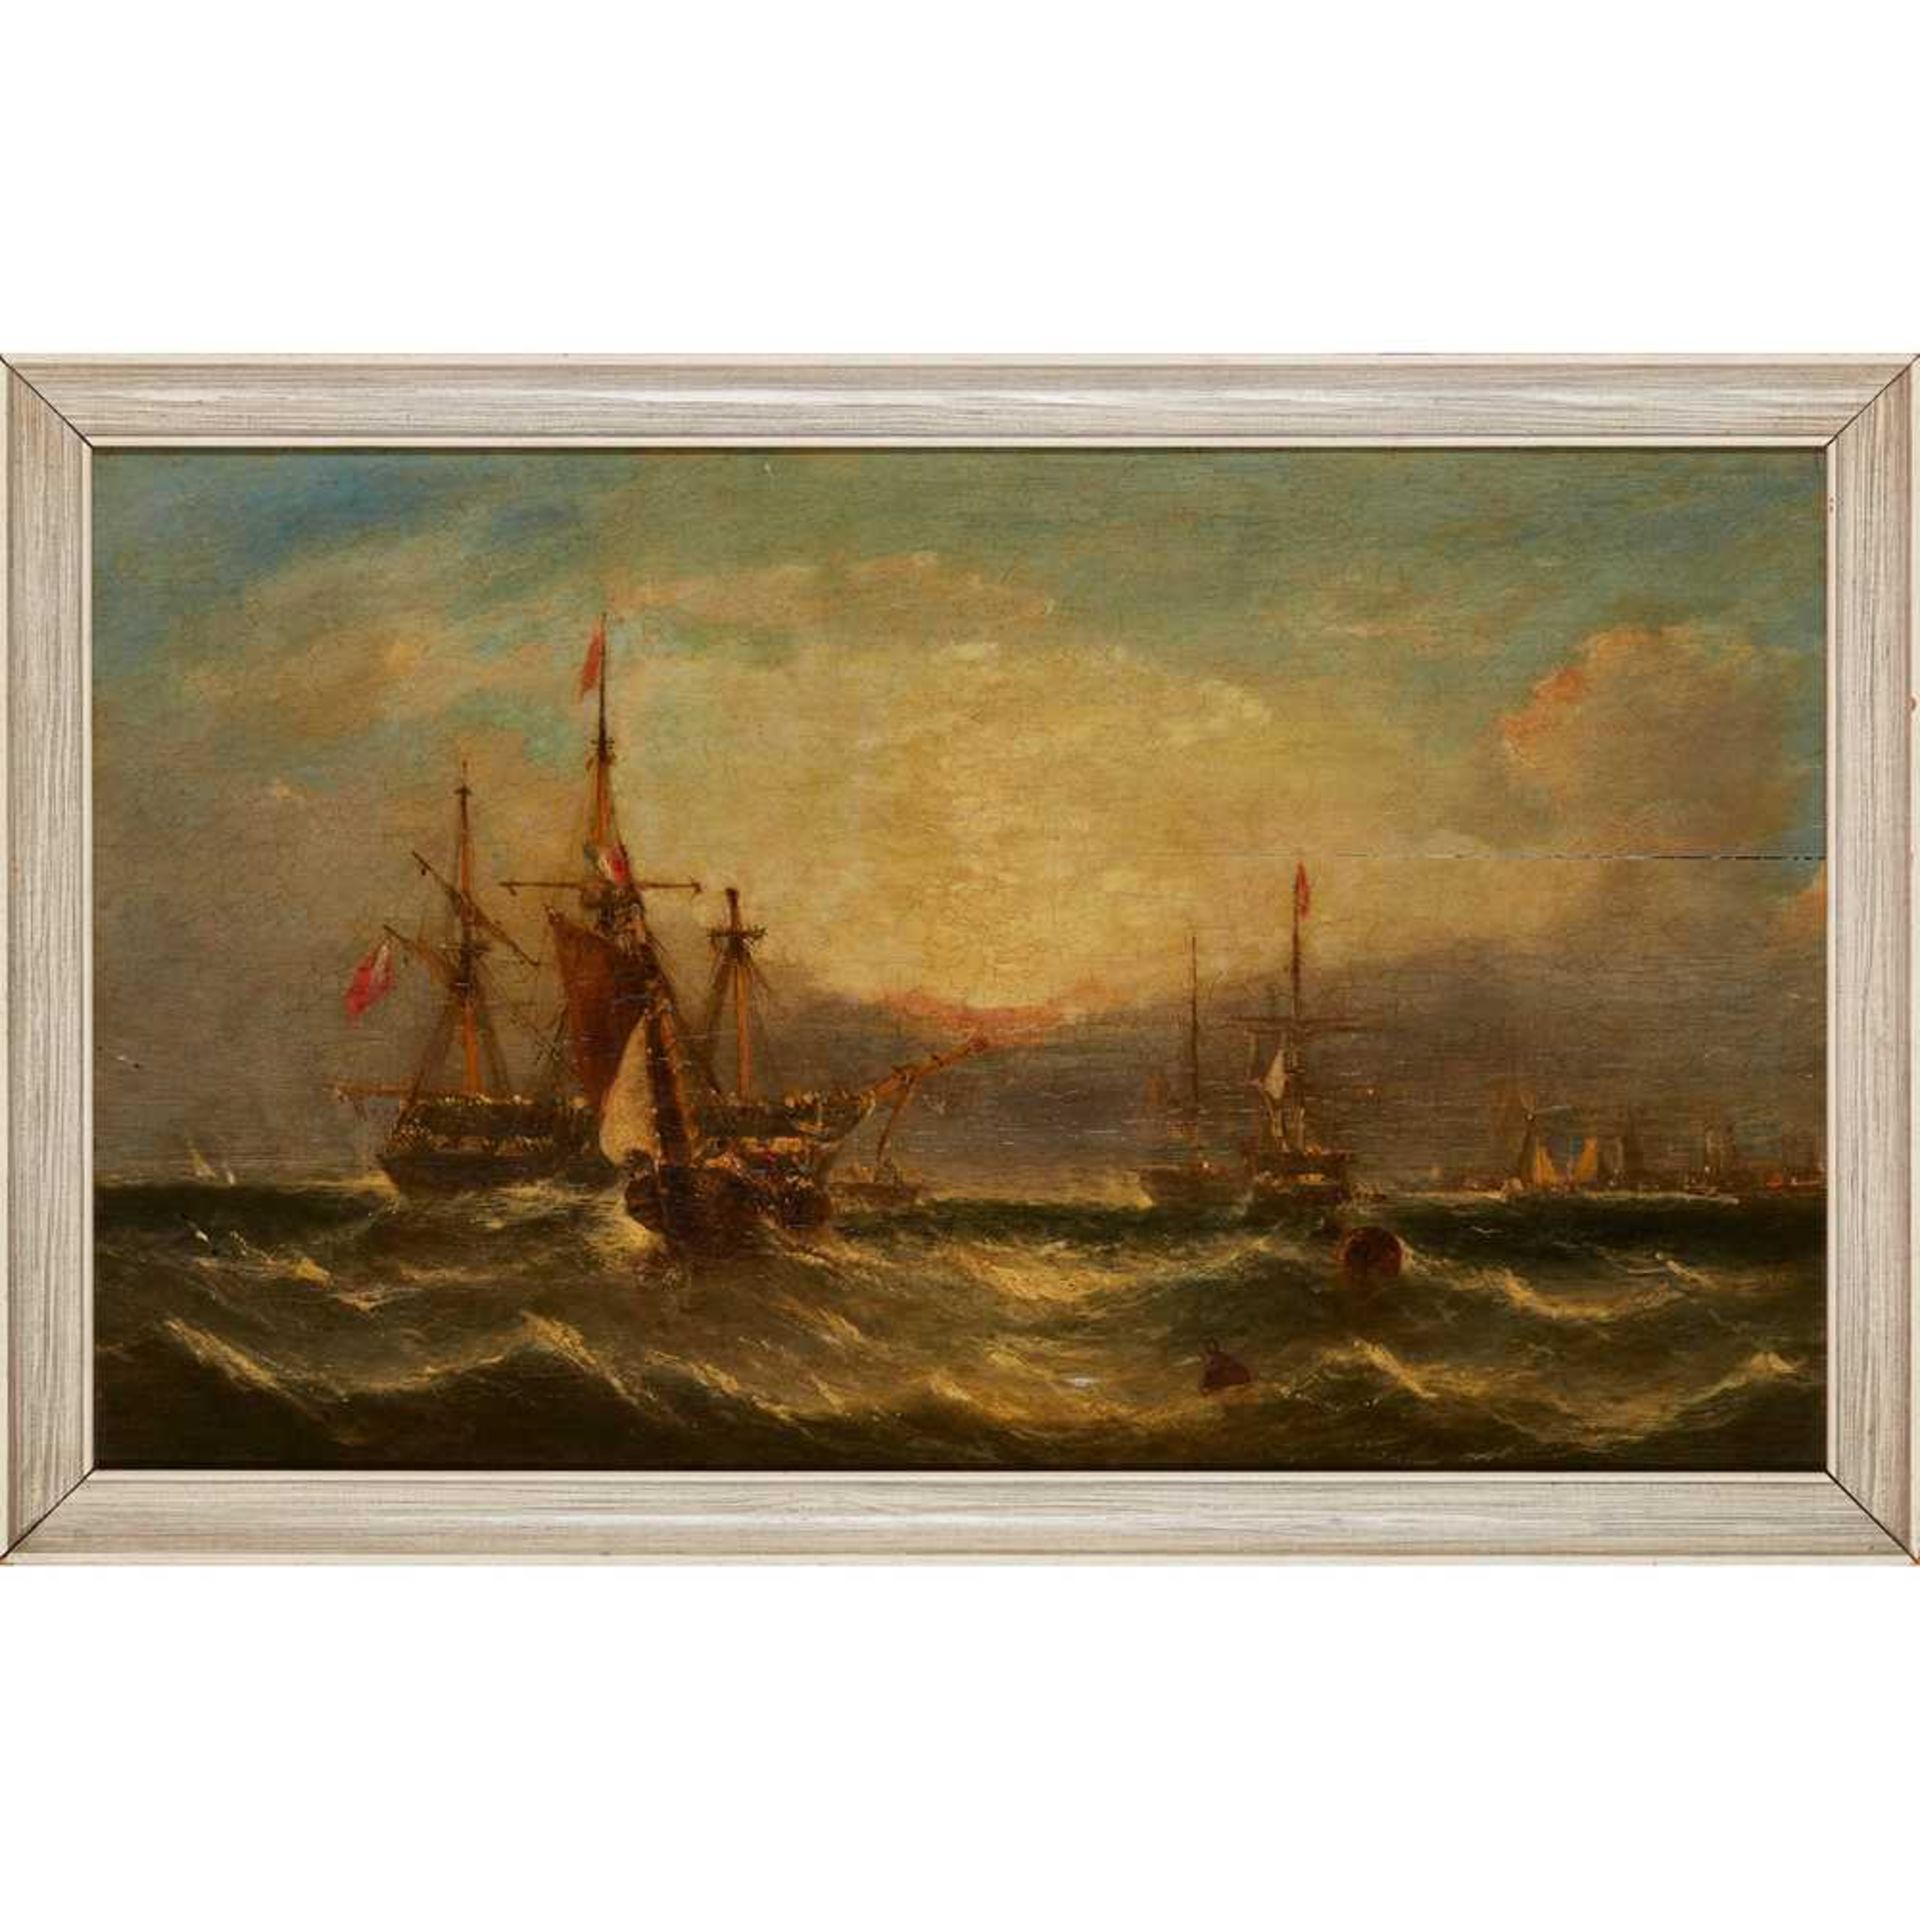 ATTRIBUTED TO WILLIAM ADOLPHUS KNELL SHIPPING OFF THE COAST IN CHOPPY SEAS - Image 3 of 6